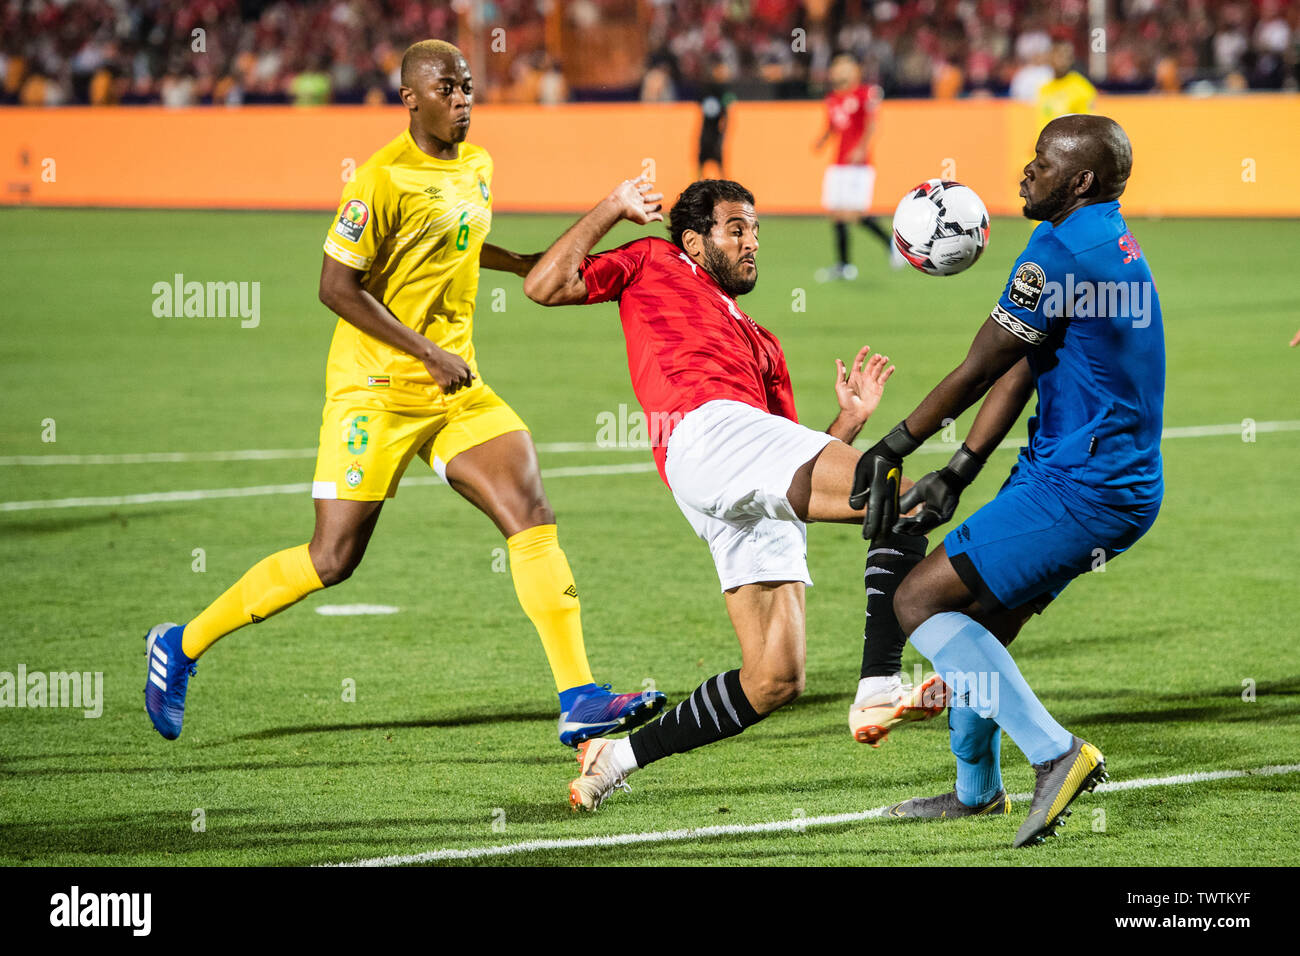 CAIRO, EGYPT - JUNE 21: Marwan Mohsen Fahmy Tarwat of Egypt challenge Edmore Sibanda of Zimbabwe duing the 2019 Africa Cup of Nations Group A match between Egypt and Zimbabwe at Cairo International Stadium on June 21, 2019 in Cairo, Egypt. (Photo by Sebastian Frej/MB Media) Stock Photo